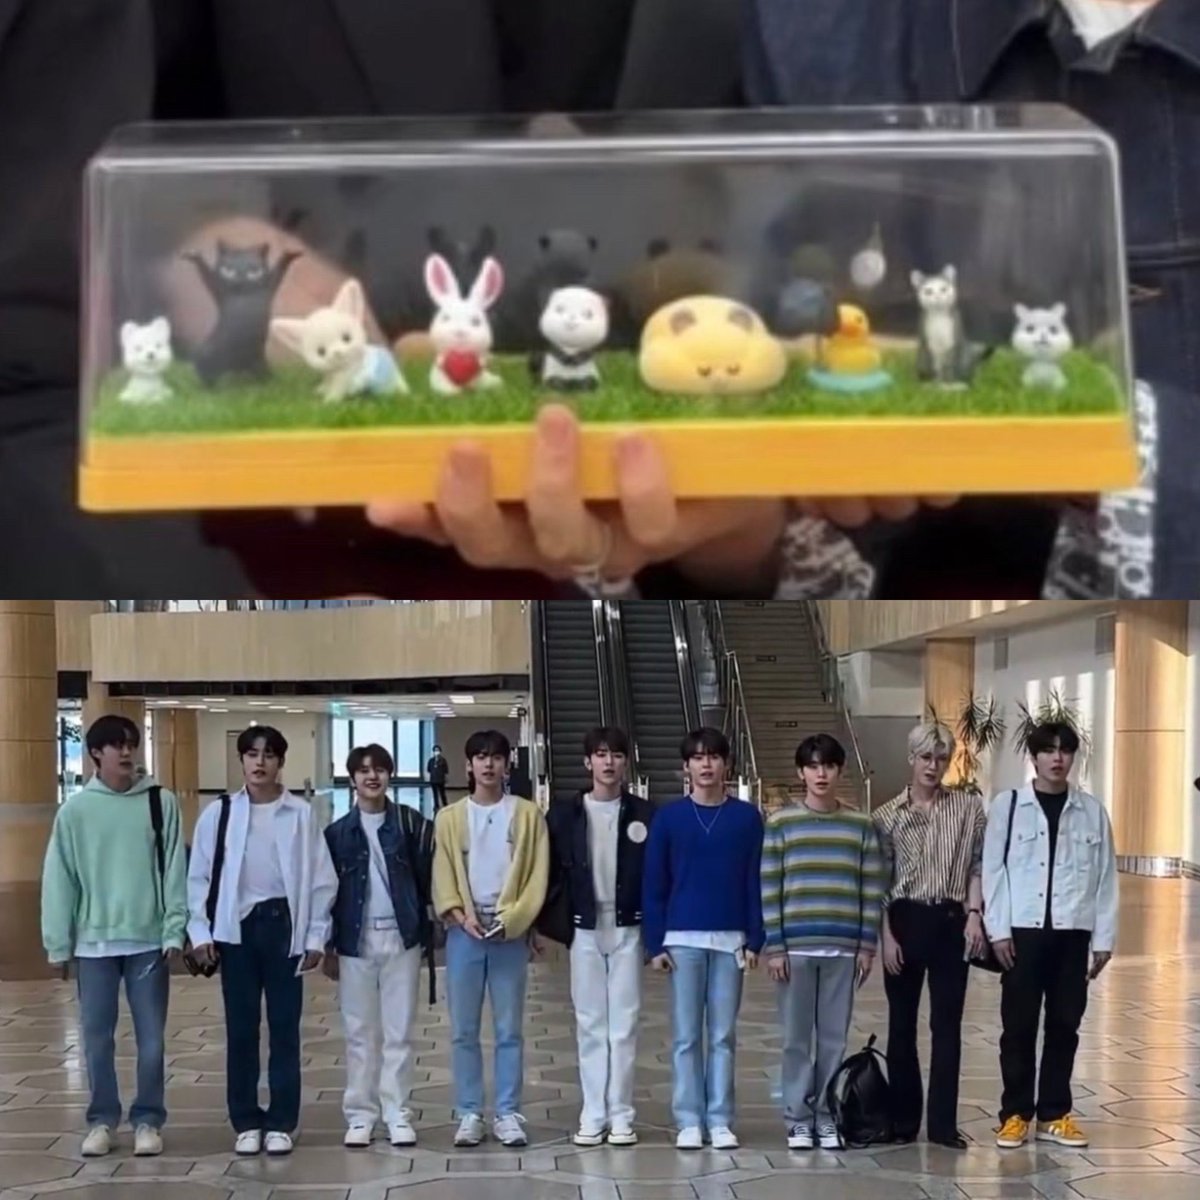 the fact that yujin put the effort to buy, choose the animal and assemble the set up like the official position remind me when he draw zb1 logo during the exam like i swear he is the biggest fans of his bandmates. he really loves his hyungs, he really loves zerobaseone ☹️💗.